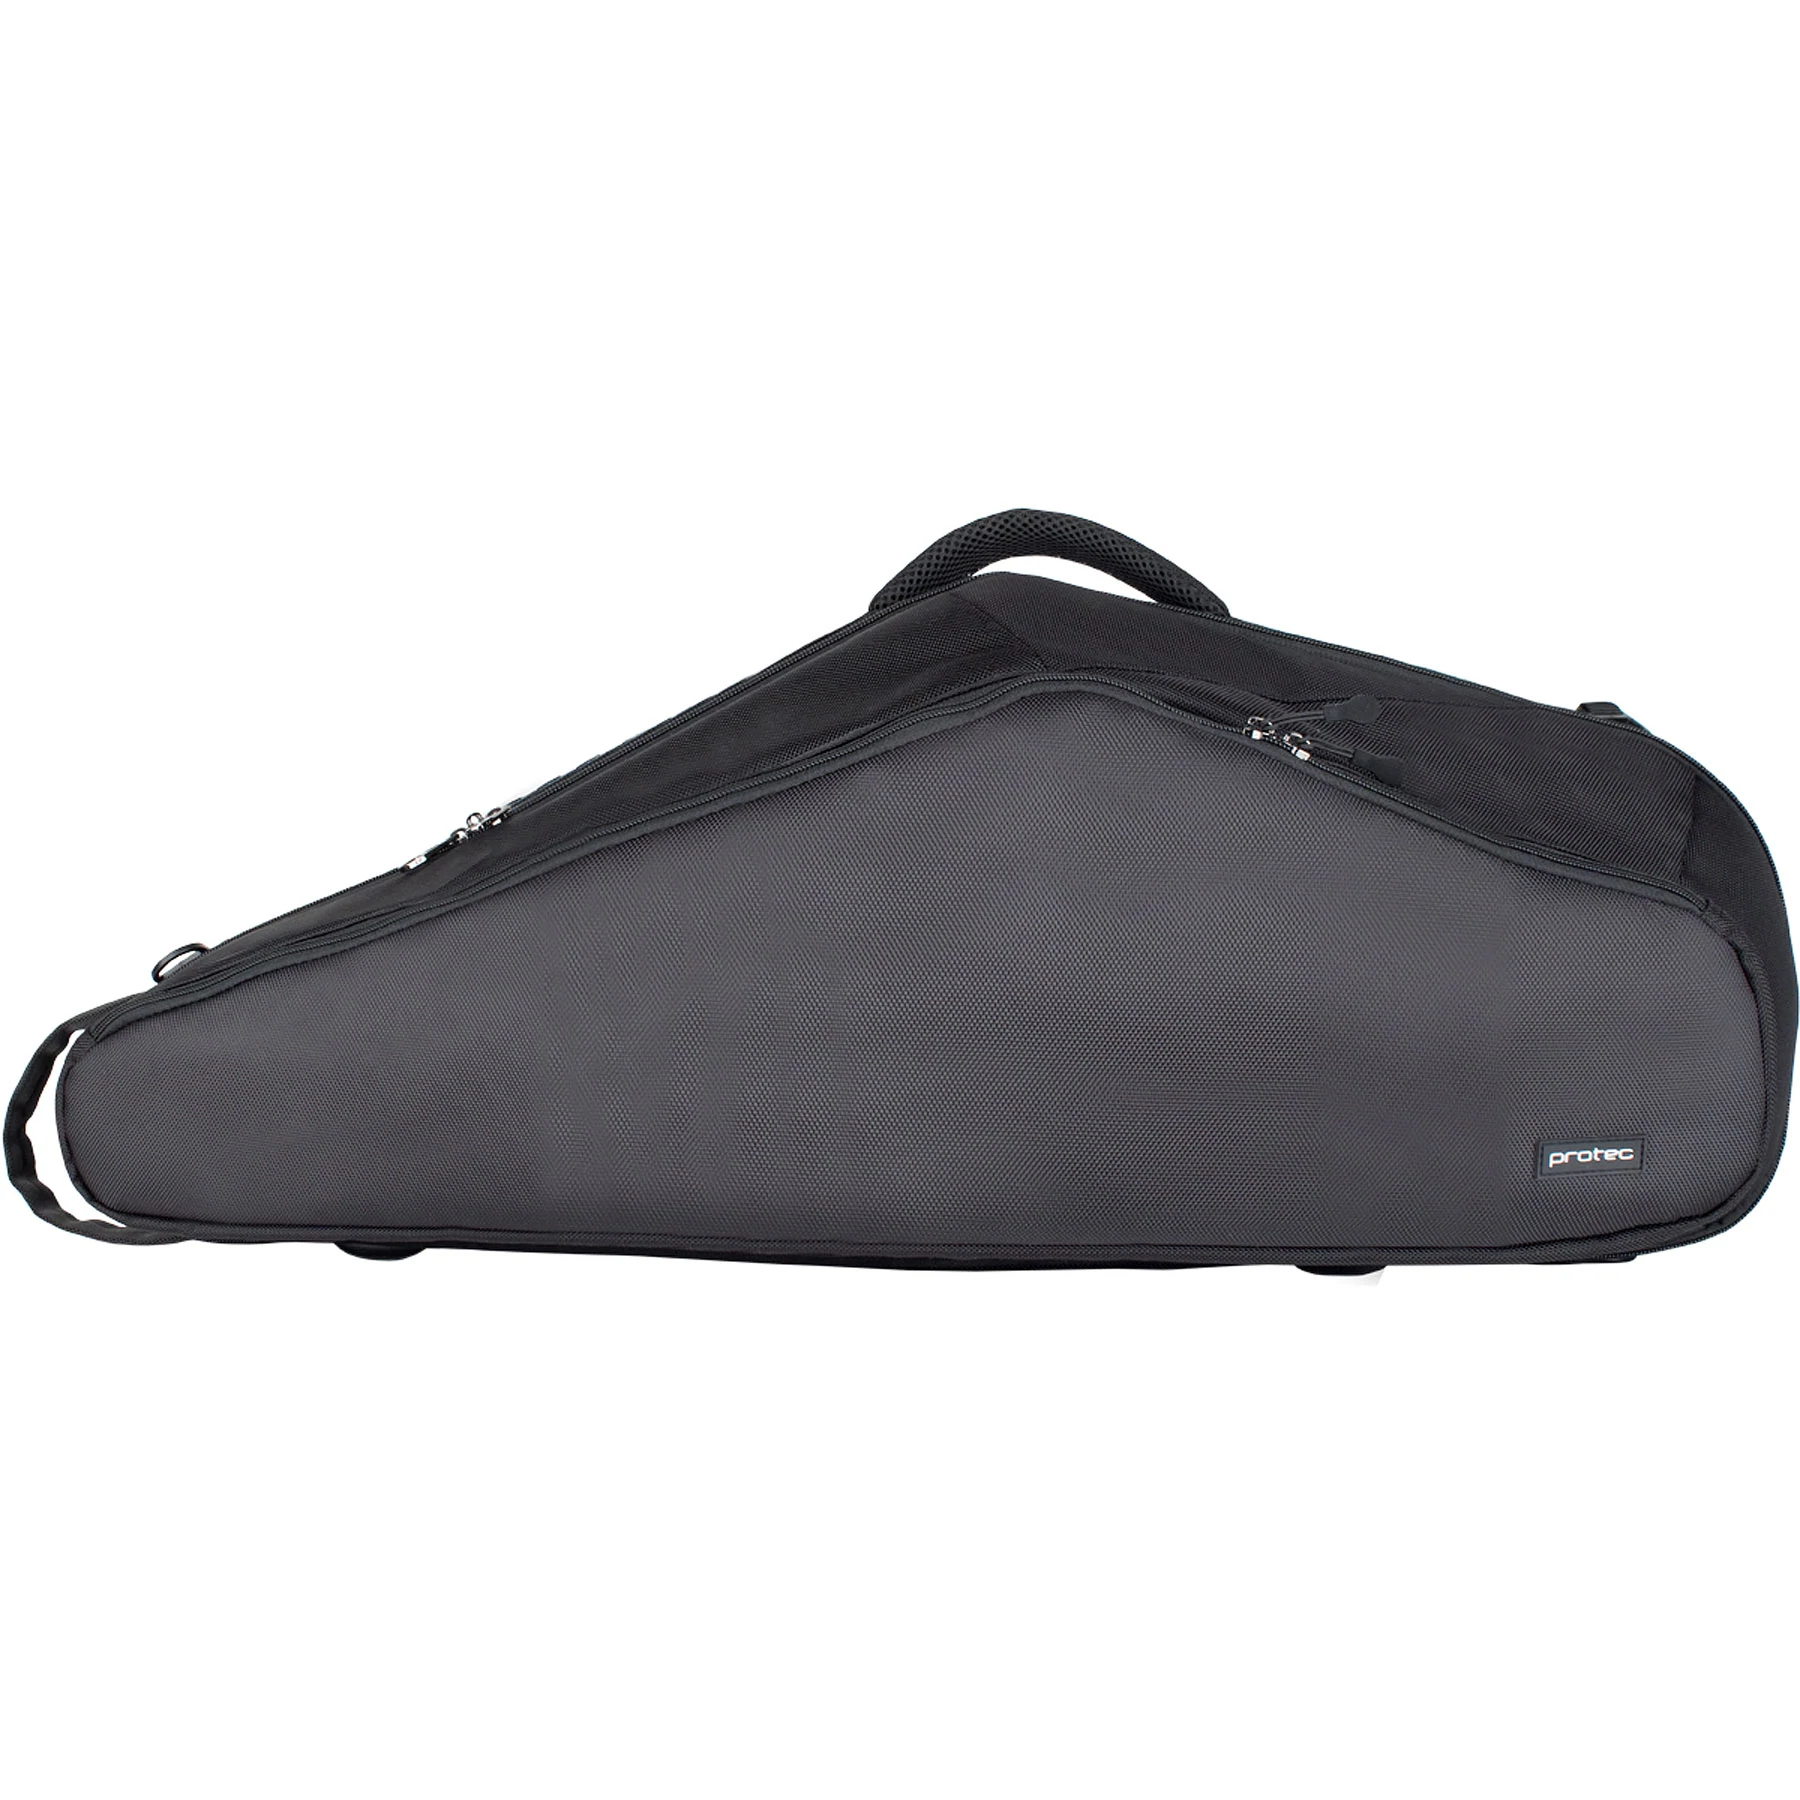 PROTEC Shaped Insulated Case Cover (Fits BM305CT Case)